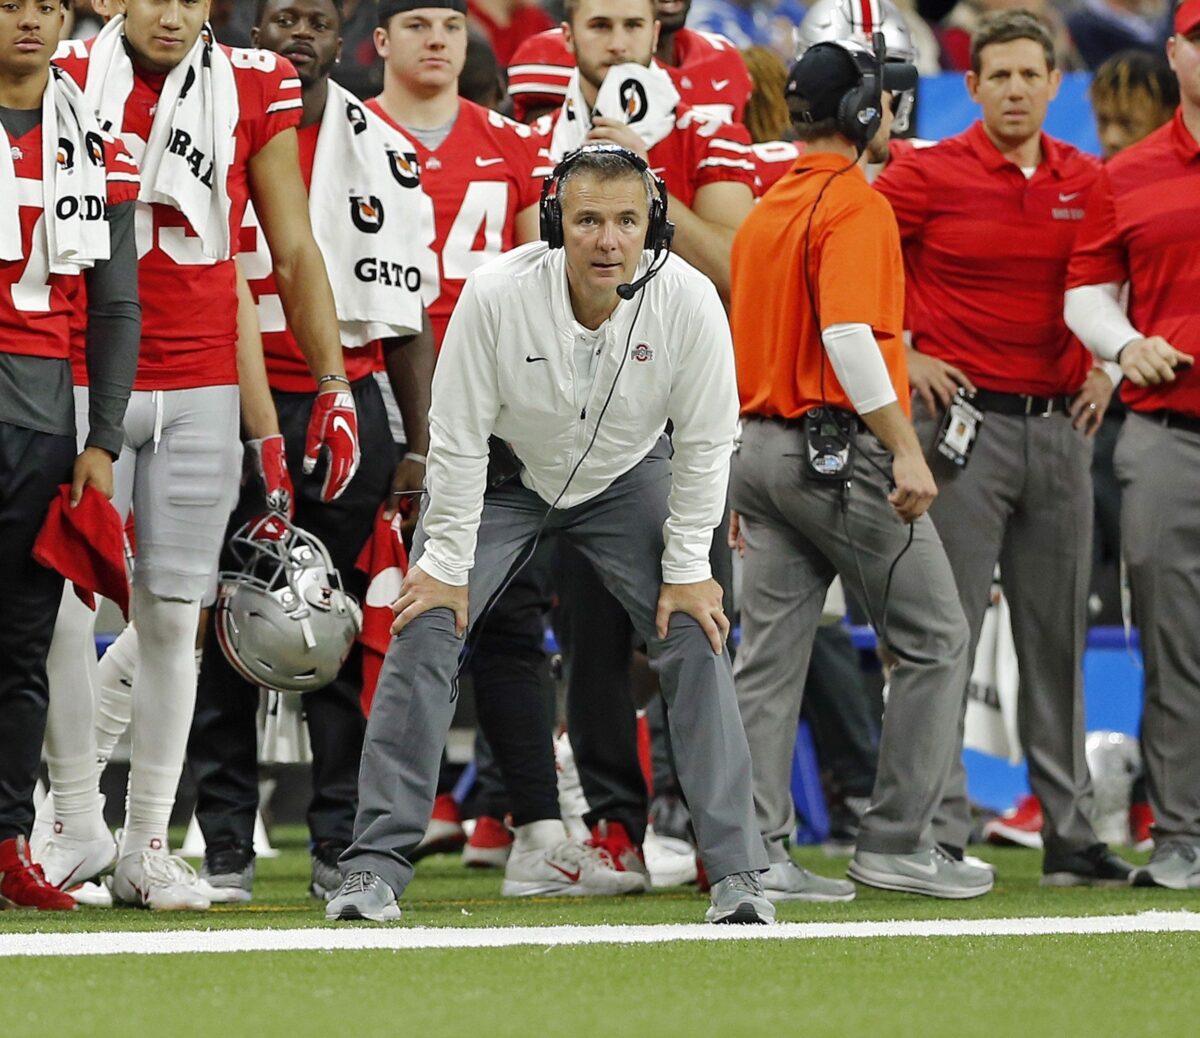 Urban Meyer is back in college football in an unconventional way